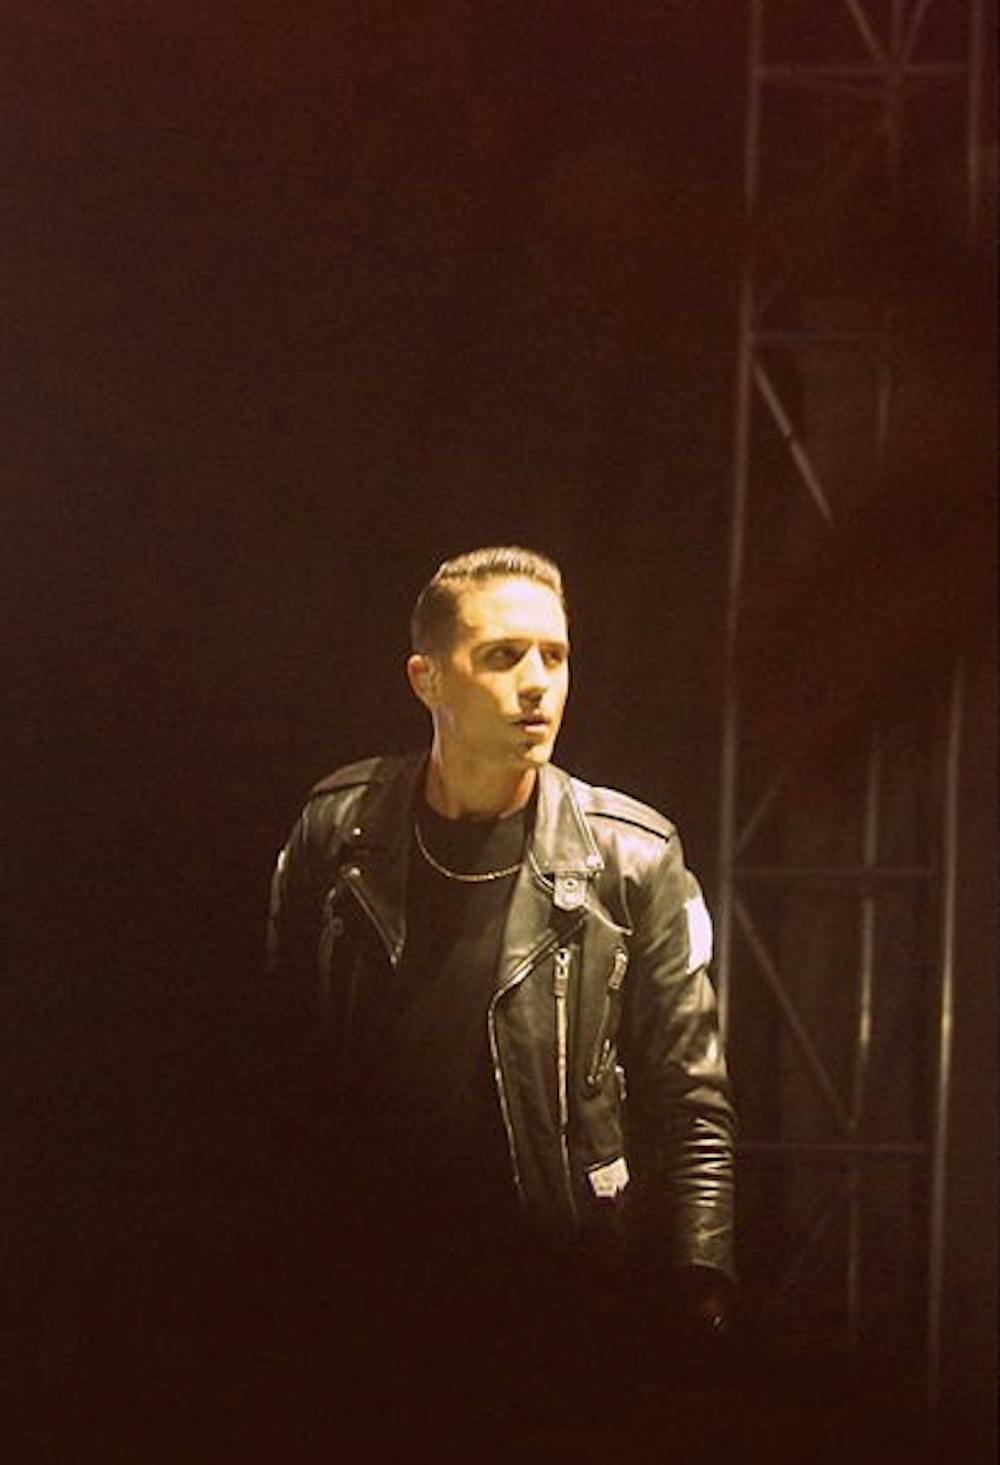 G-Eazy is set to release his latest album on Dec. 4, followed by&nbsp;a world tour to promote it.